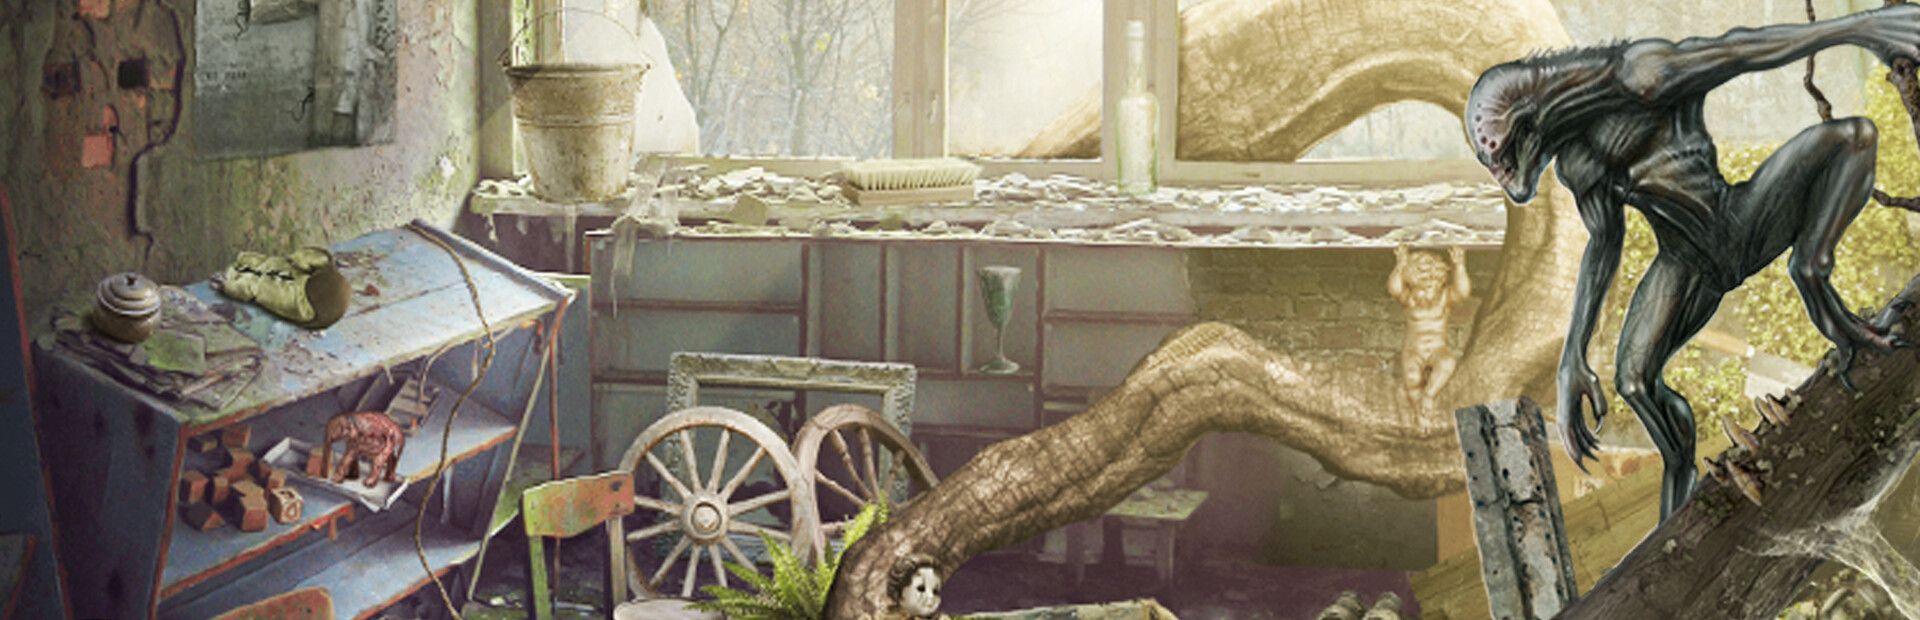 Time Trap - Hidden Objects Puzzle Game cover image